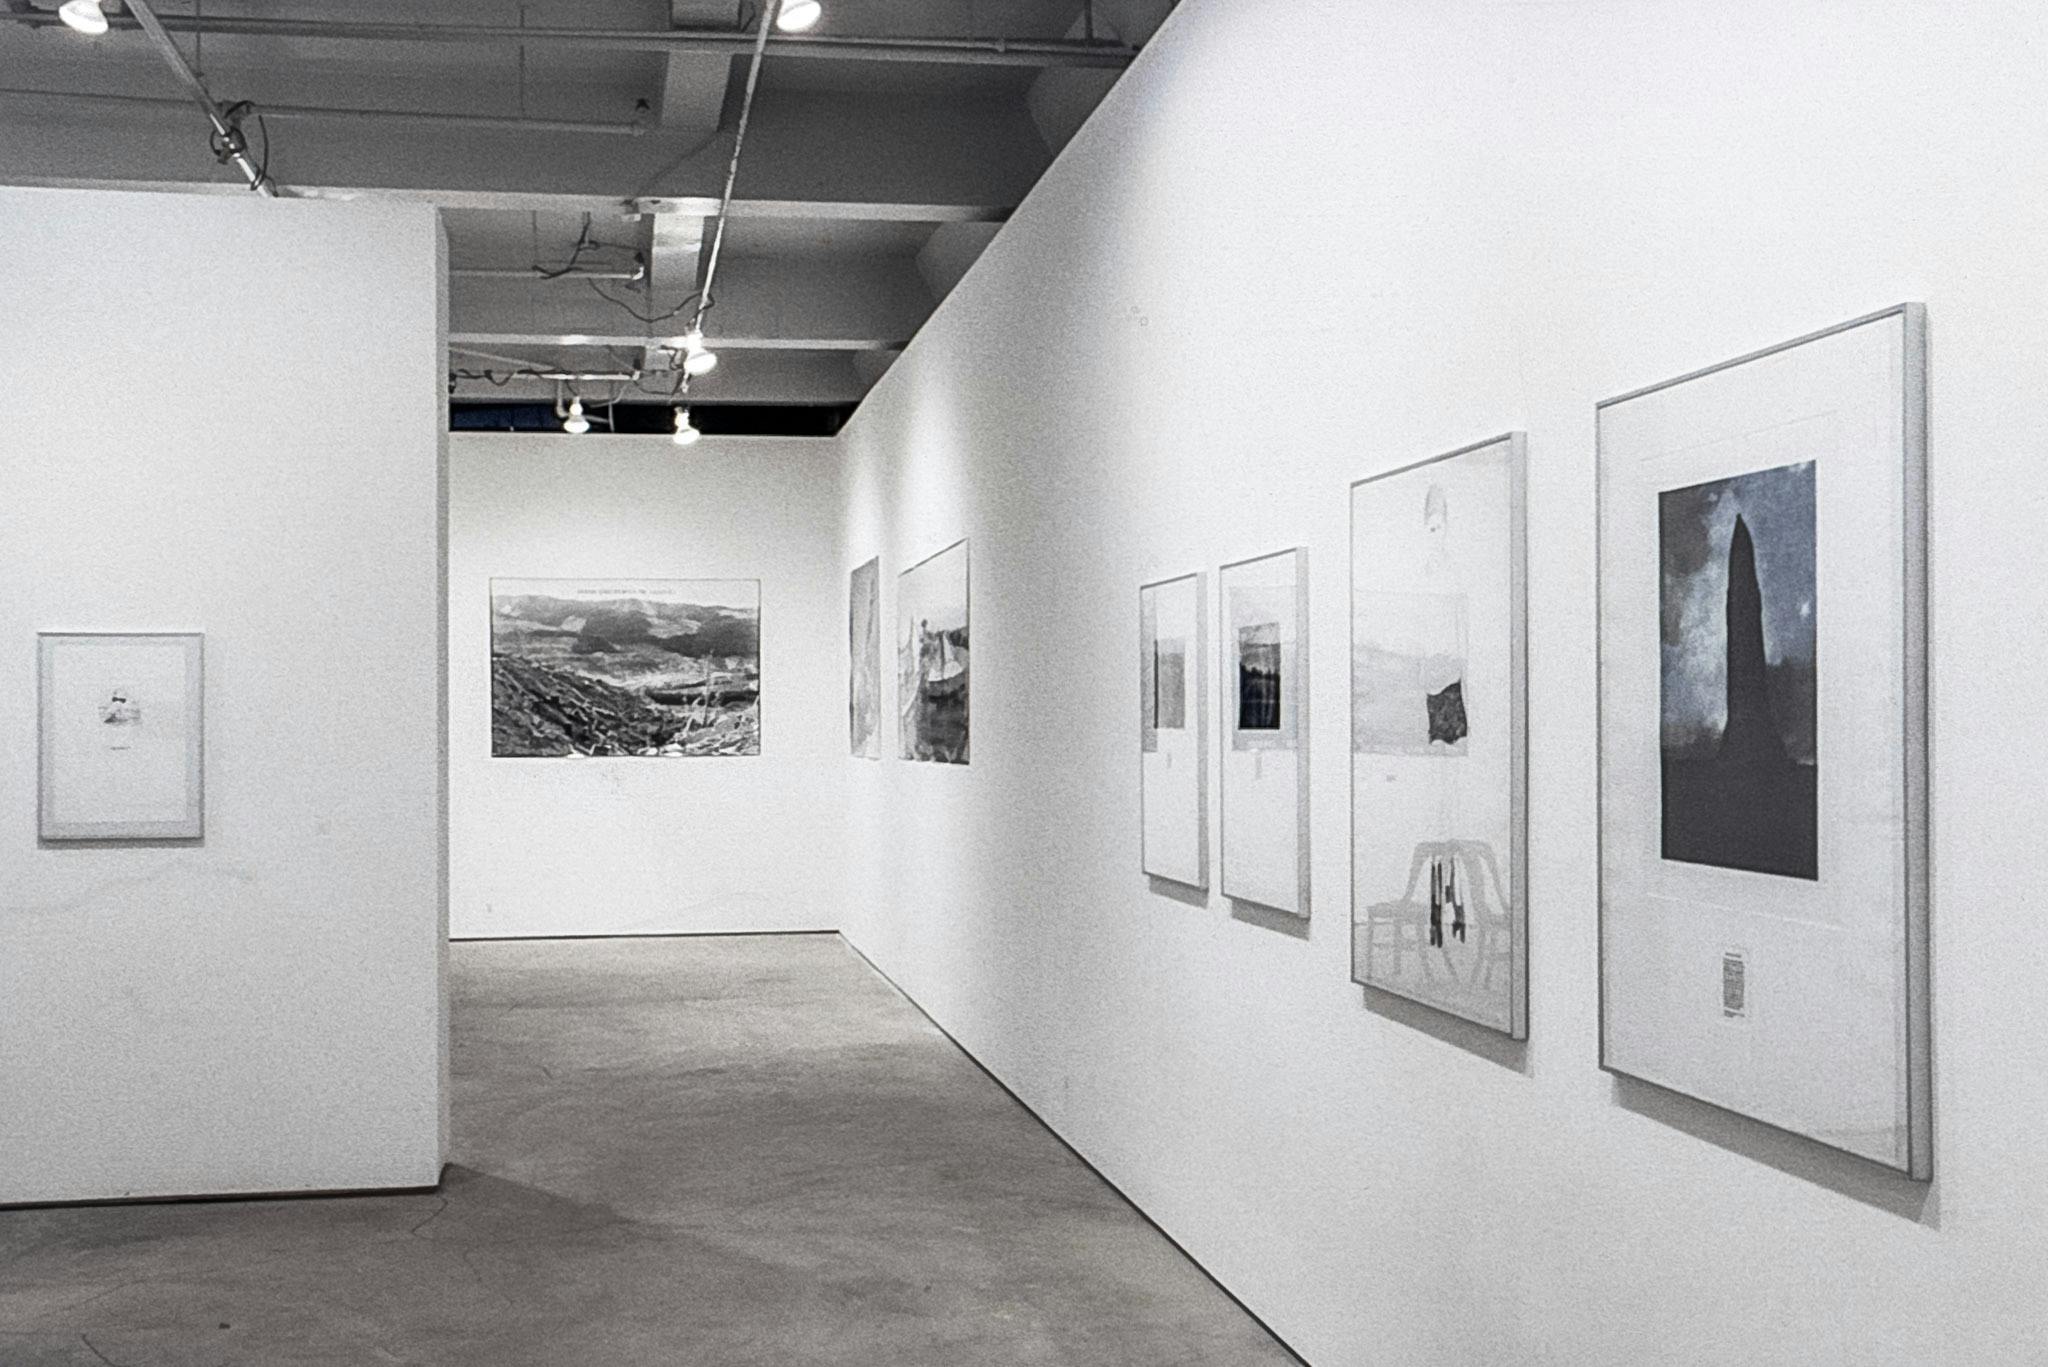 Walls of a gallery space lined with artworks. The works in the foreground are medium-sized illustrations in metal frames. In the background there are large, unframed, black and white photos.